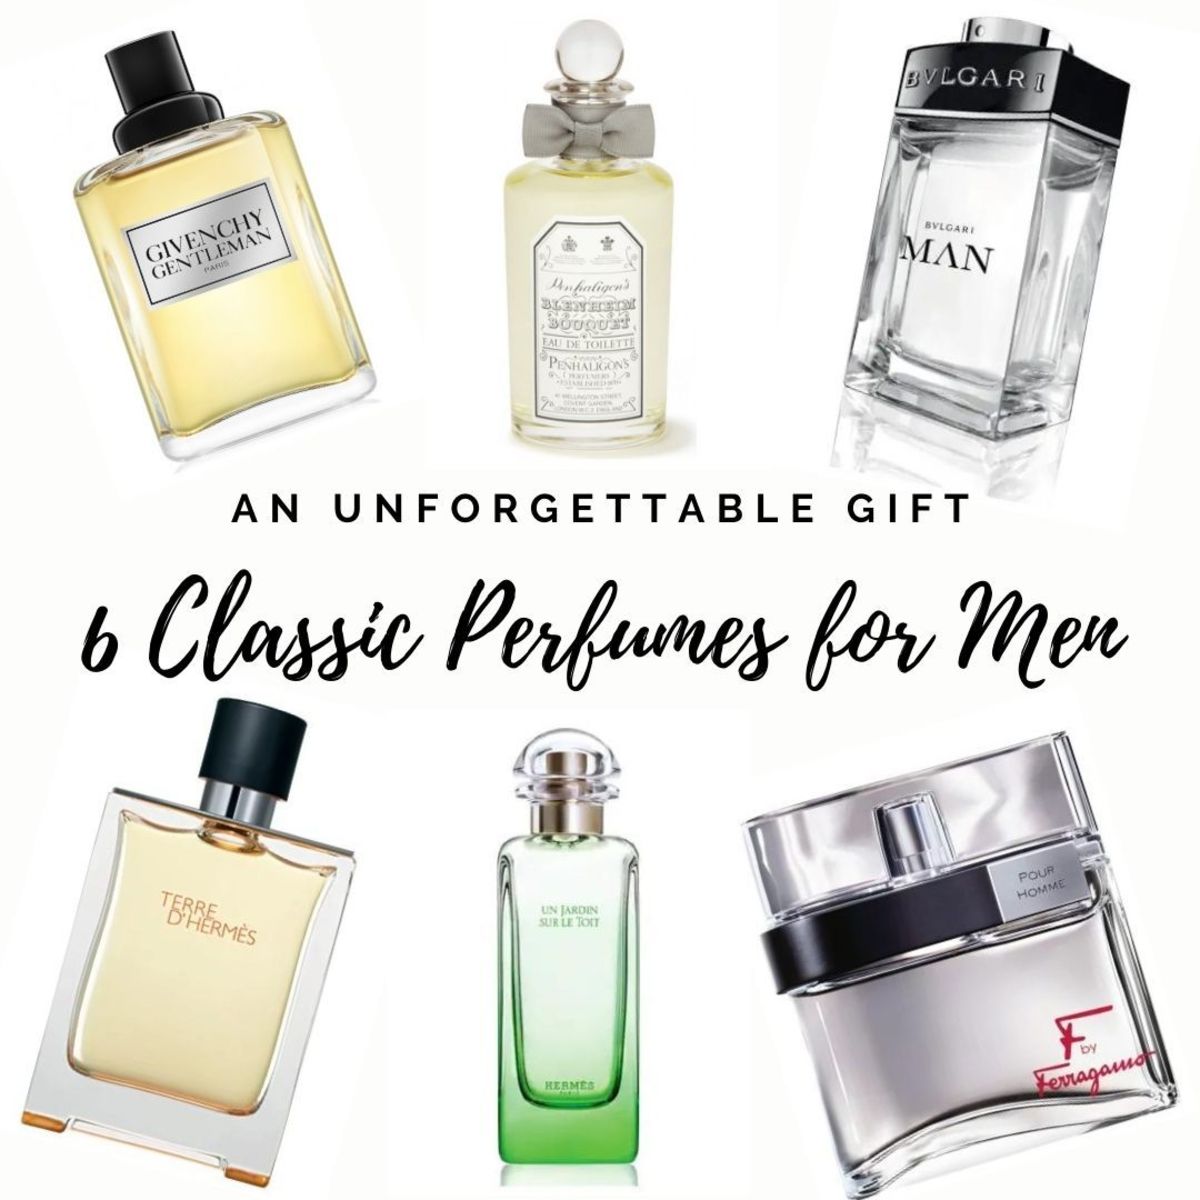 An unforgettable gift: 6 Classic Men's Cologne